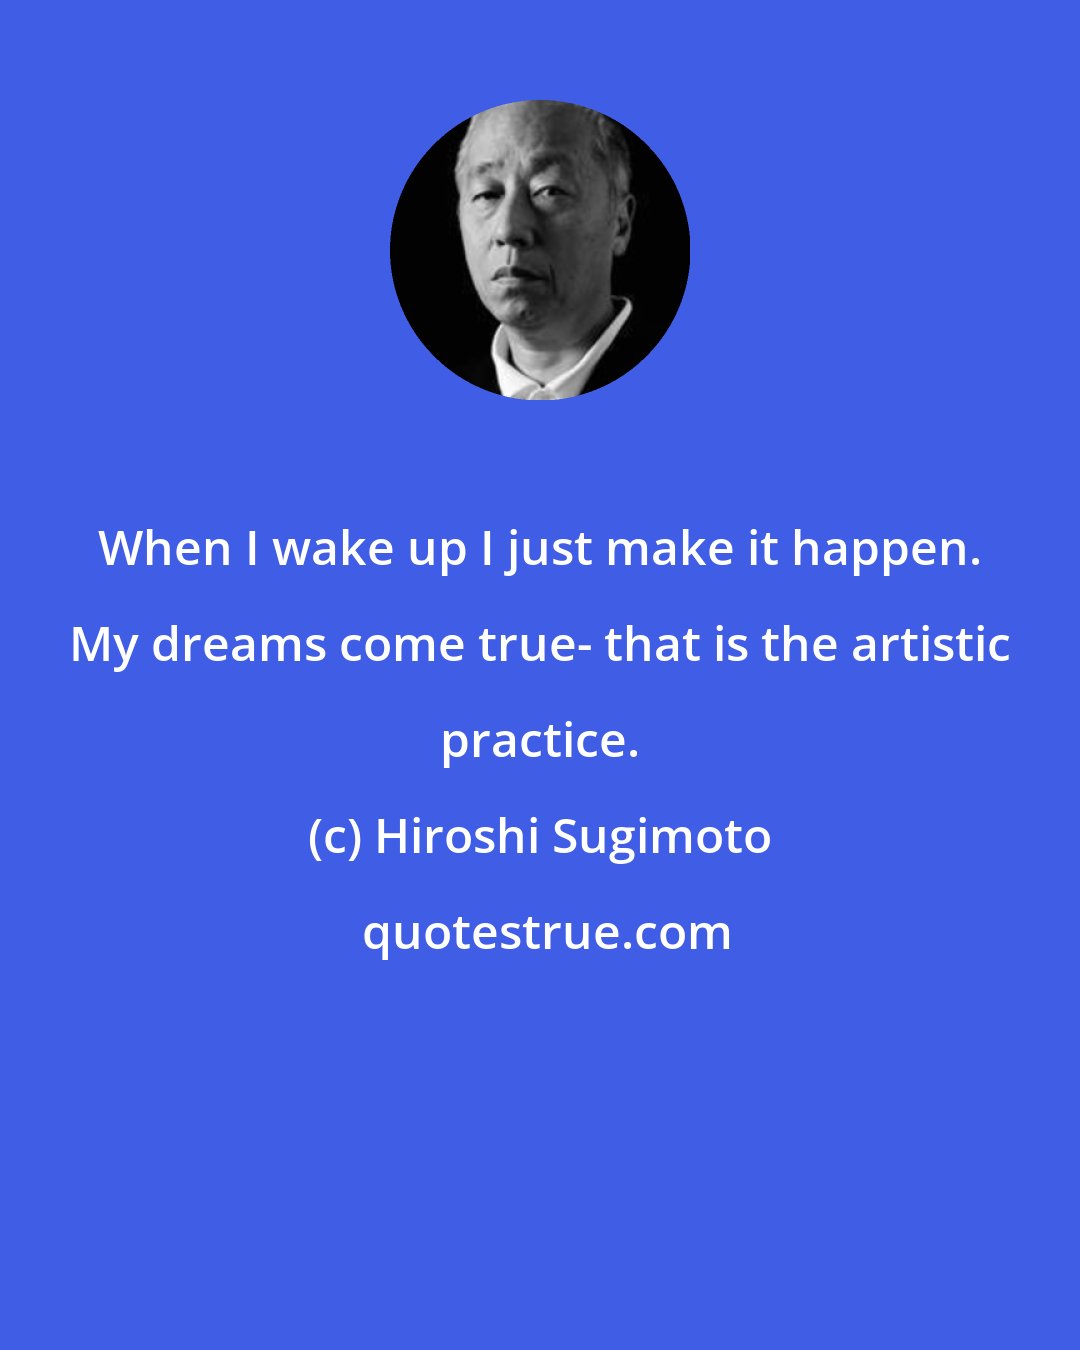 Hiroshi Sugimoto: When I wake up I just make it happen. My dreams come true- that is the artistic practice.